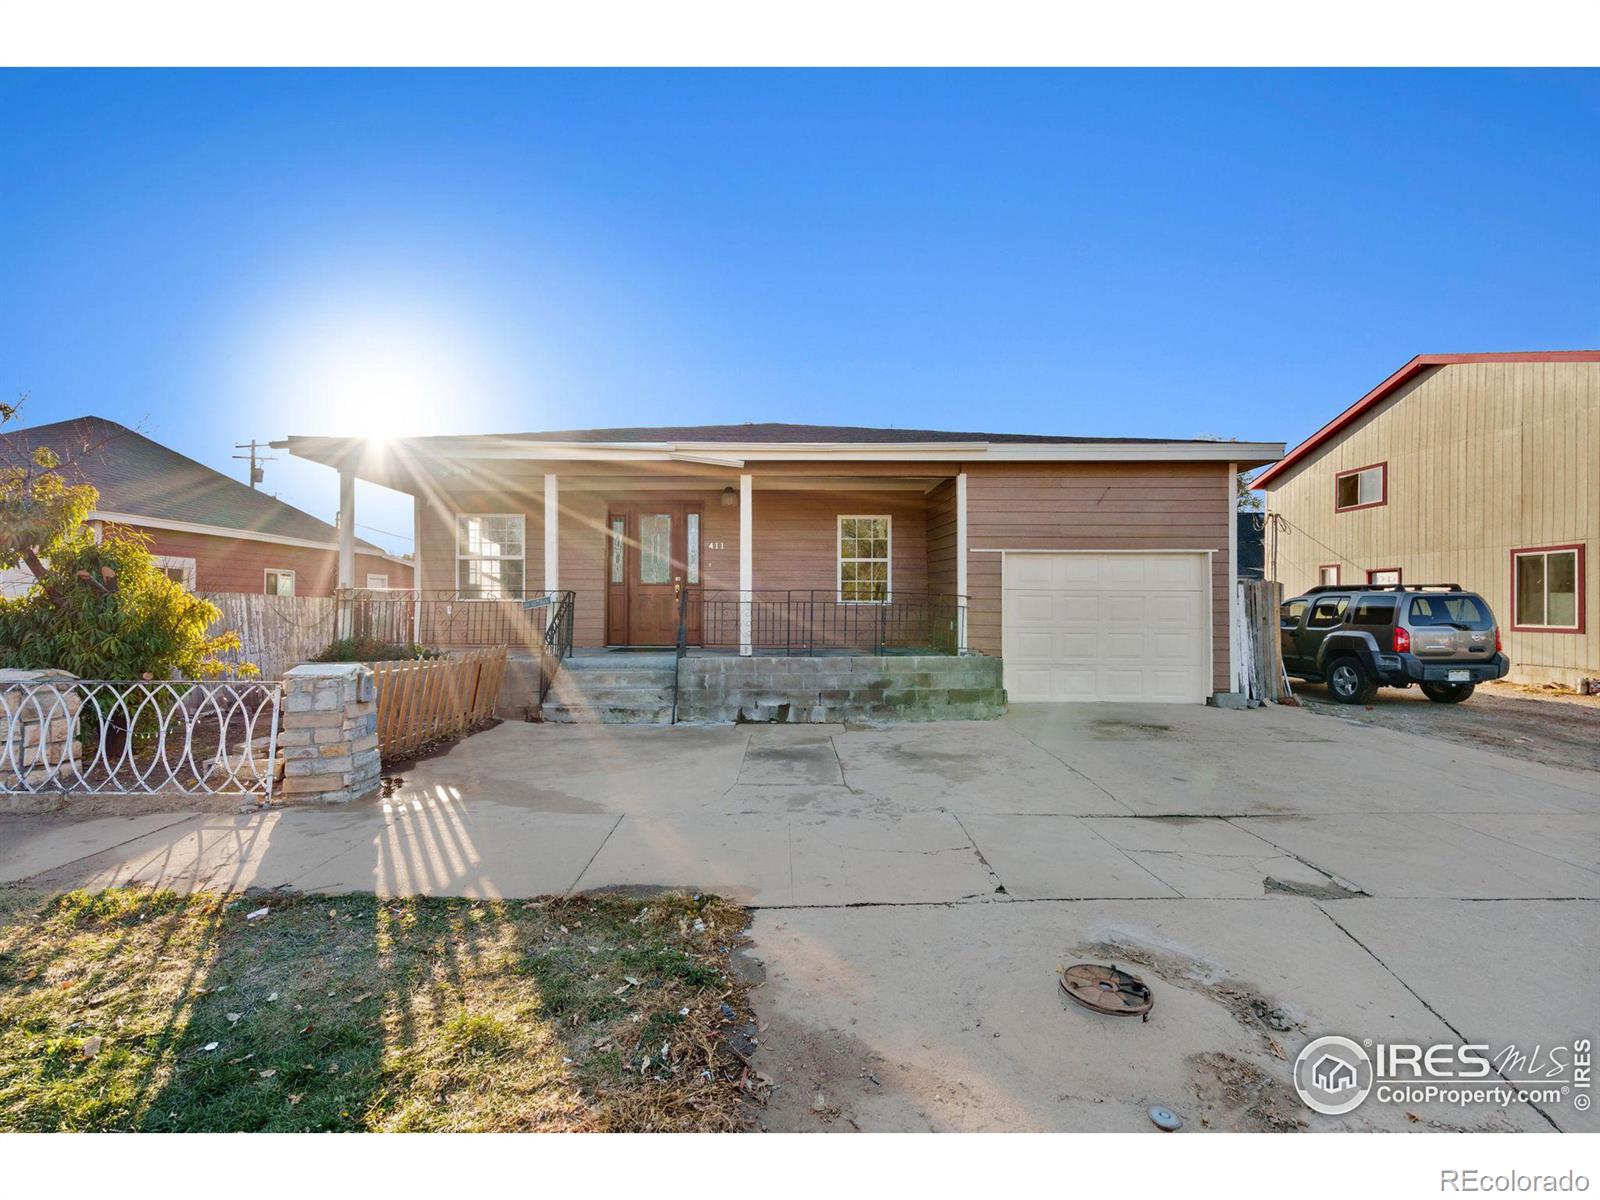 411  10th Avenue, greeley MLS: 4567891003561 Beds: 11 Baths: 4 Price: $395,000